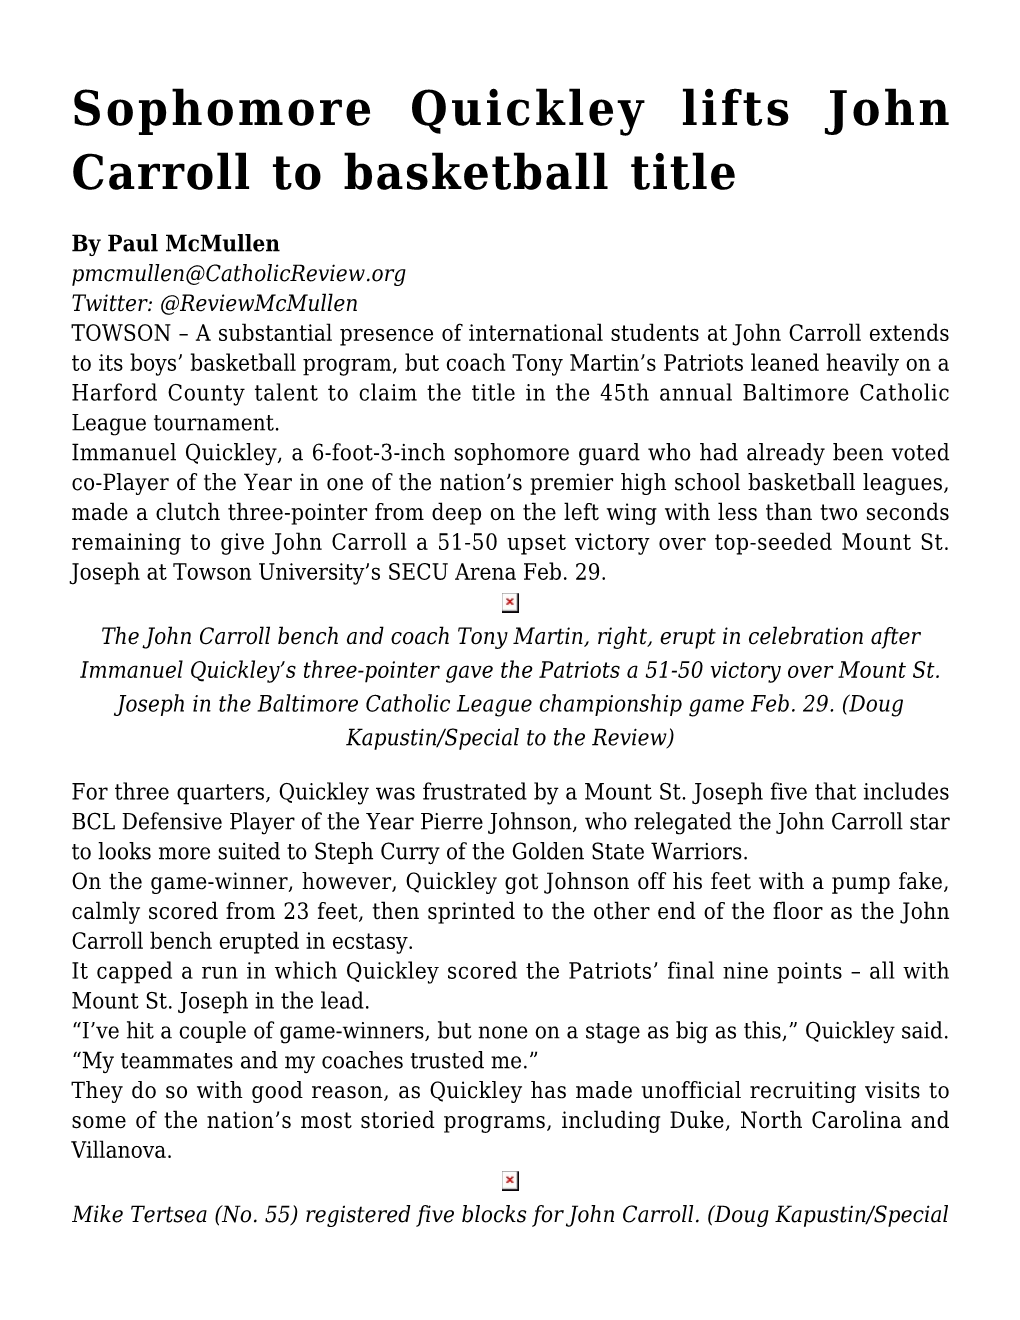 Sophomore Quickley Lifts John Carroll to Basketball Title